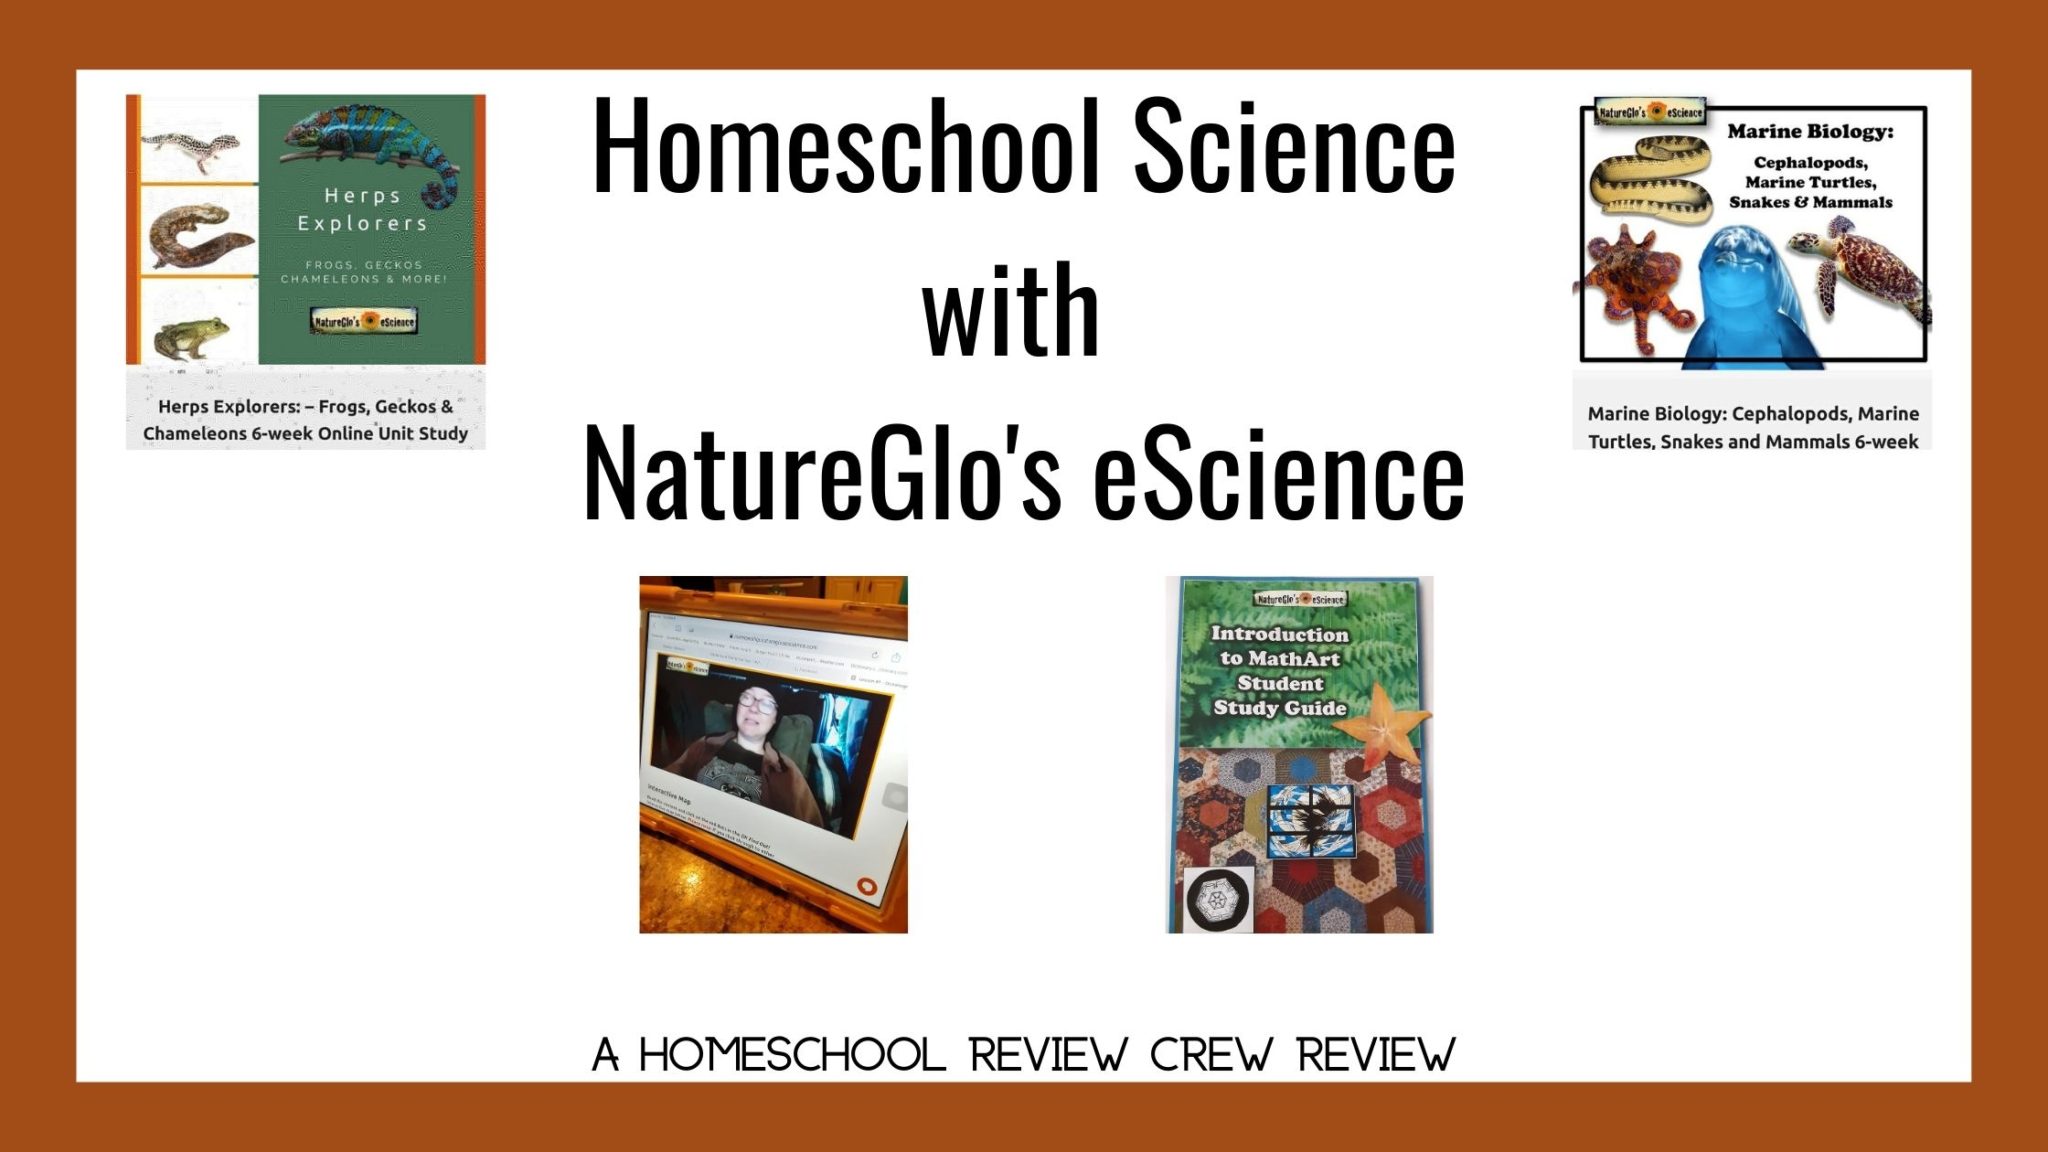 You are currently viewing Homeschool Science with NatureGlo’s eScience